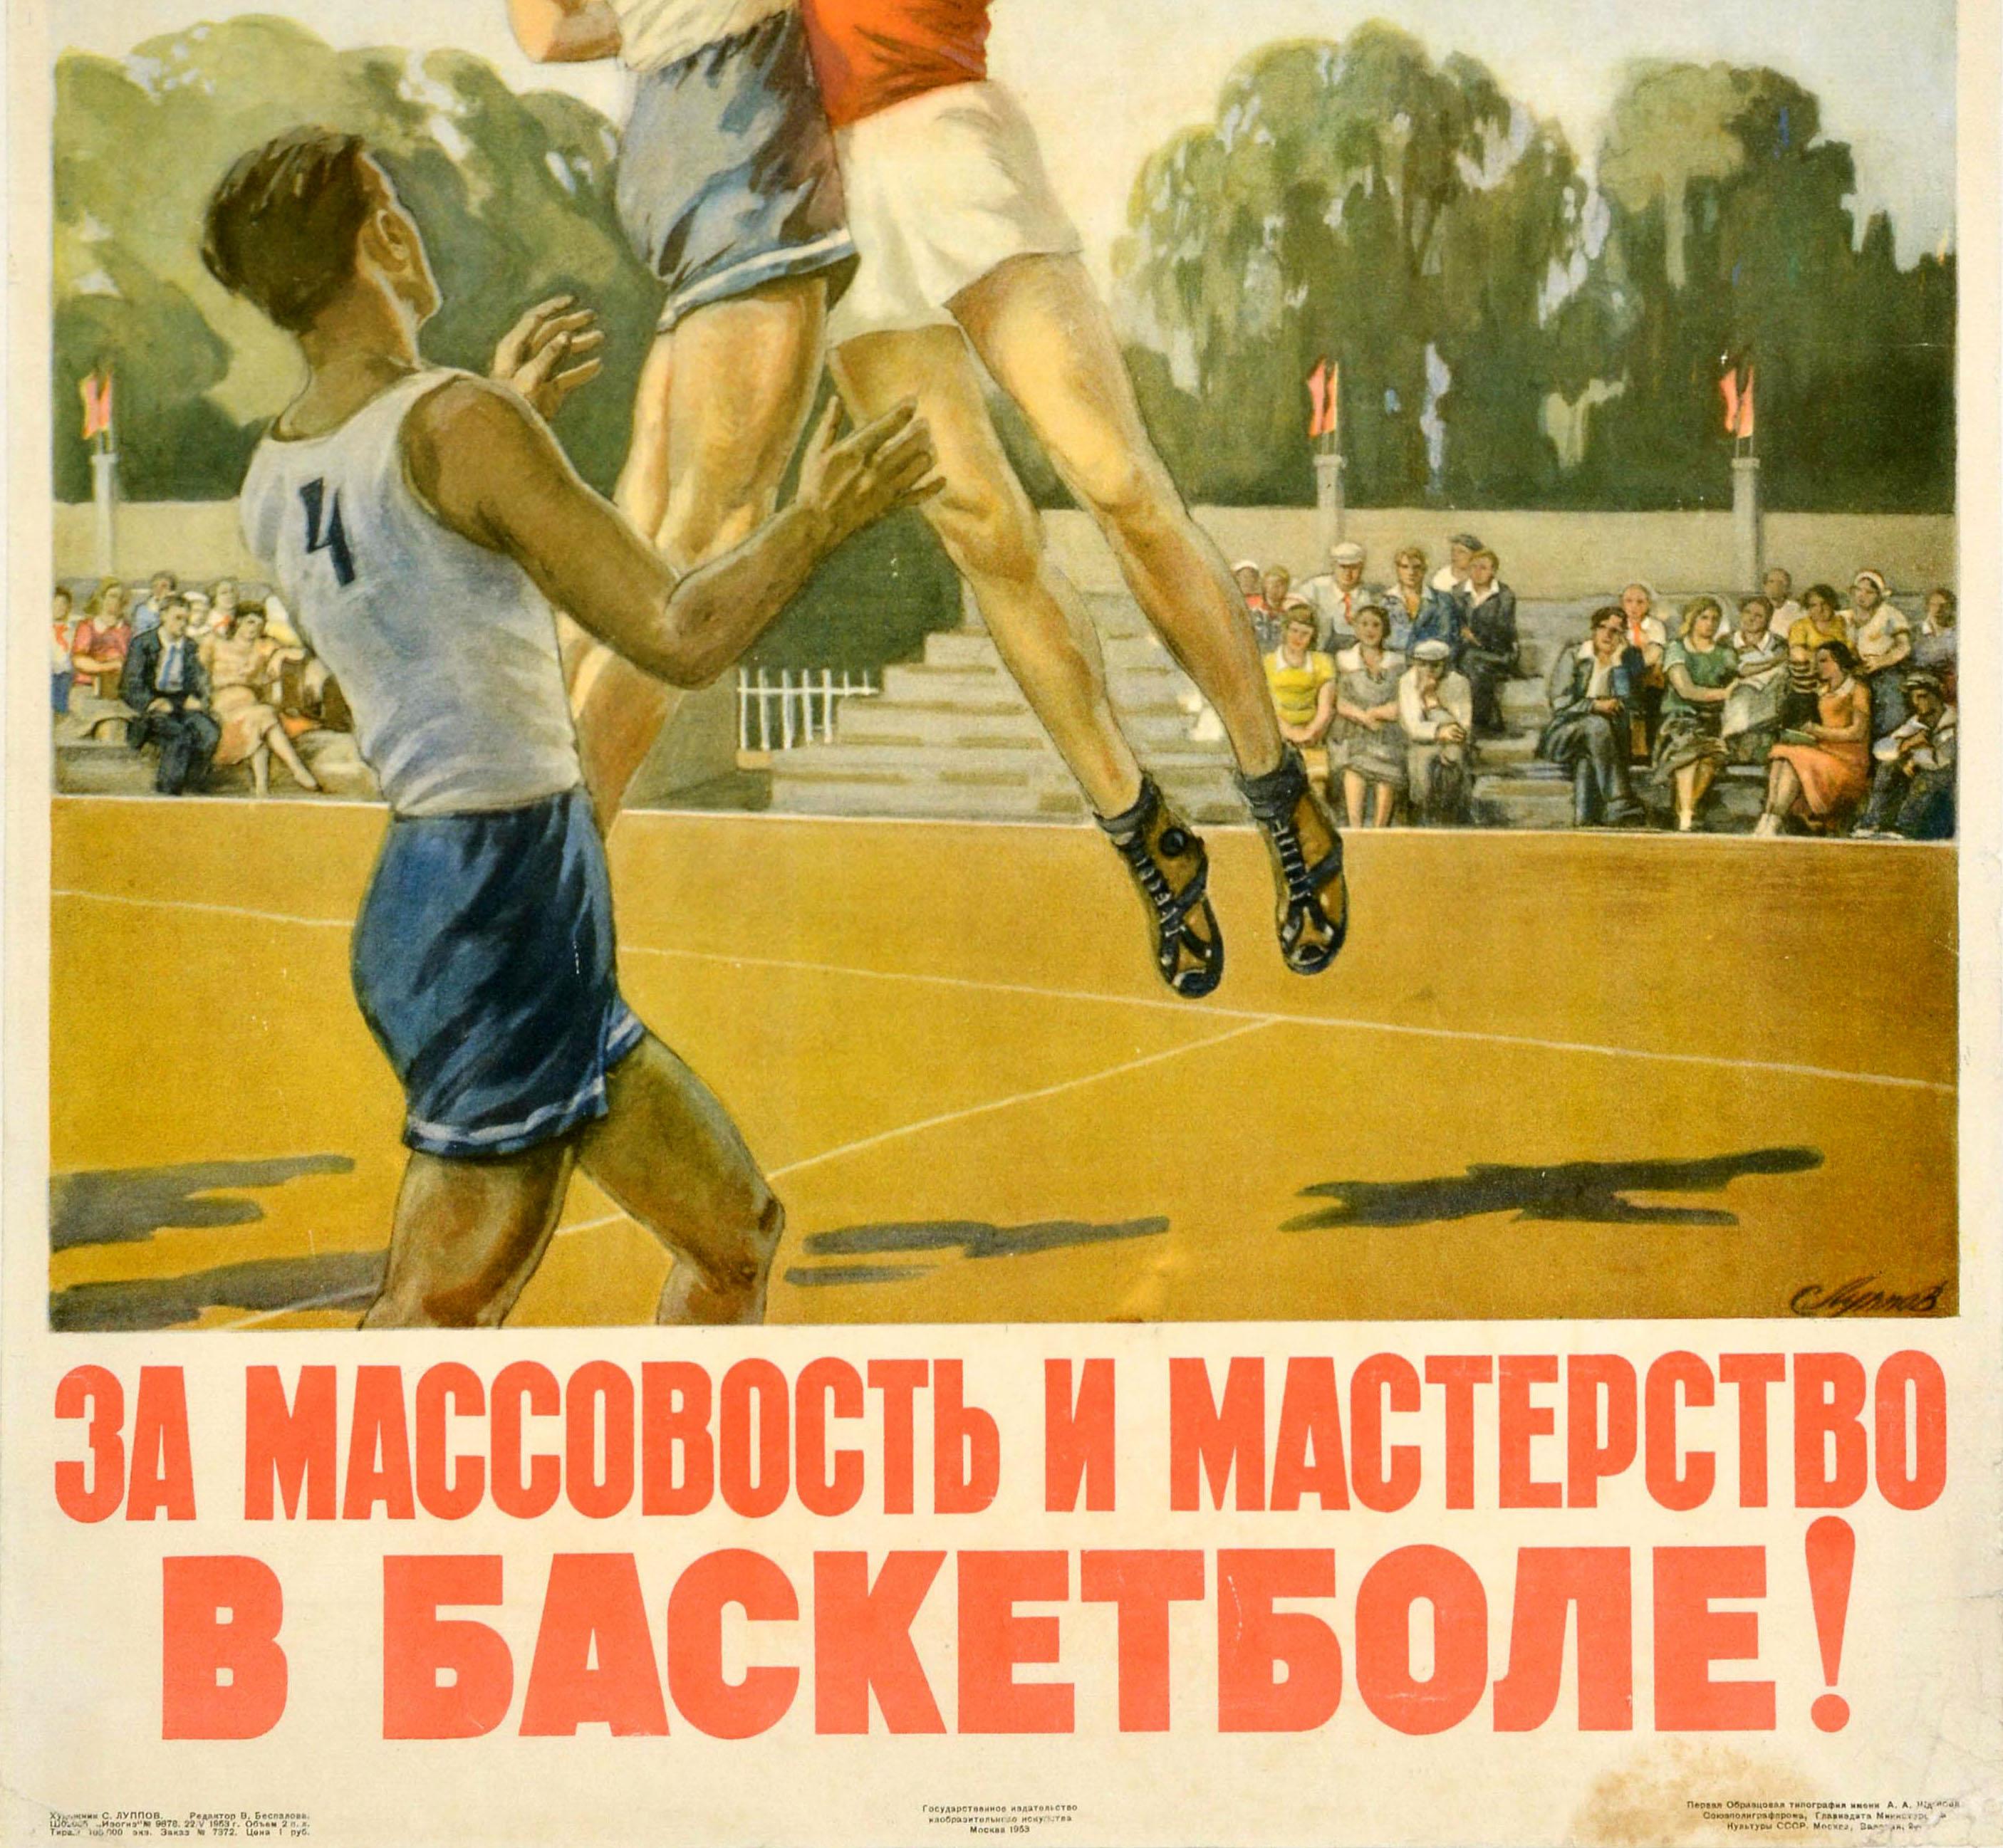 Original vintage Soviet sport poster - За массовость и мастерство в баскетболе! For mass character and skill in basketball! - featuring an illustration of two basketball players jumping for the ball by the net with spectators sitting below red flags